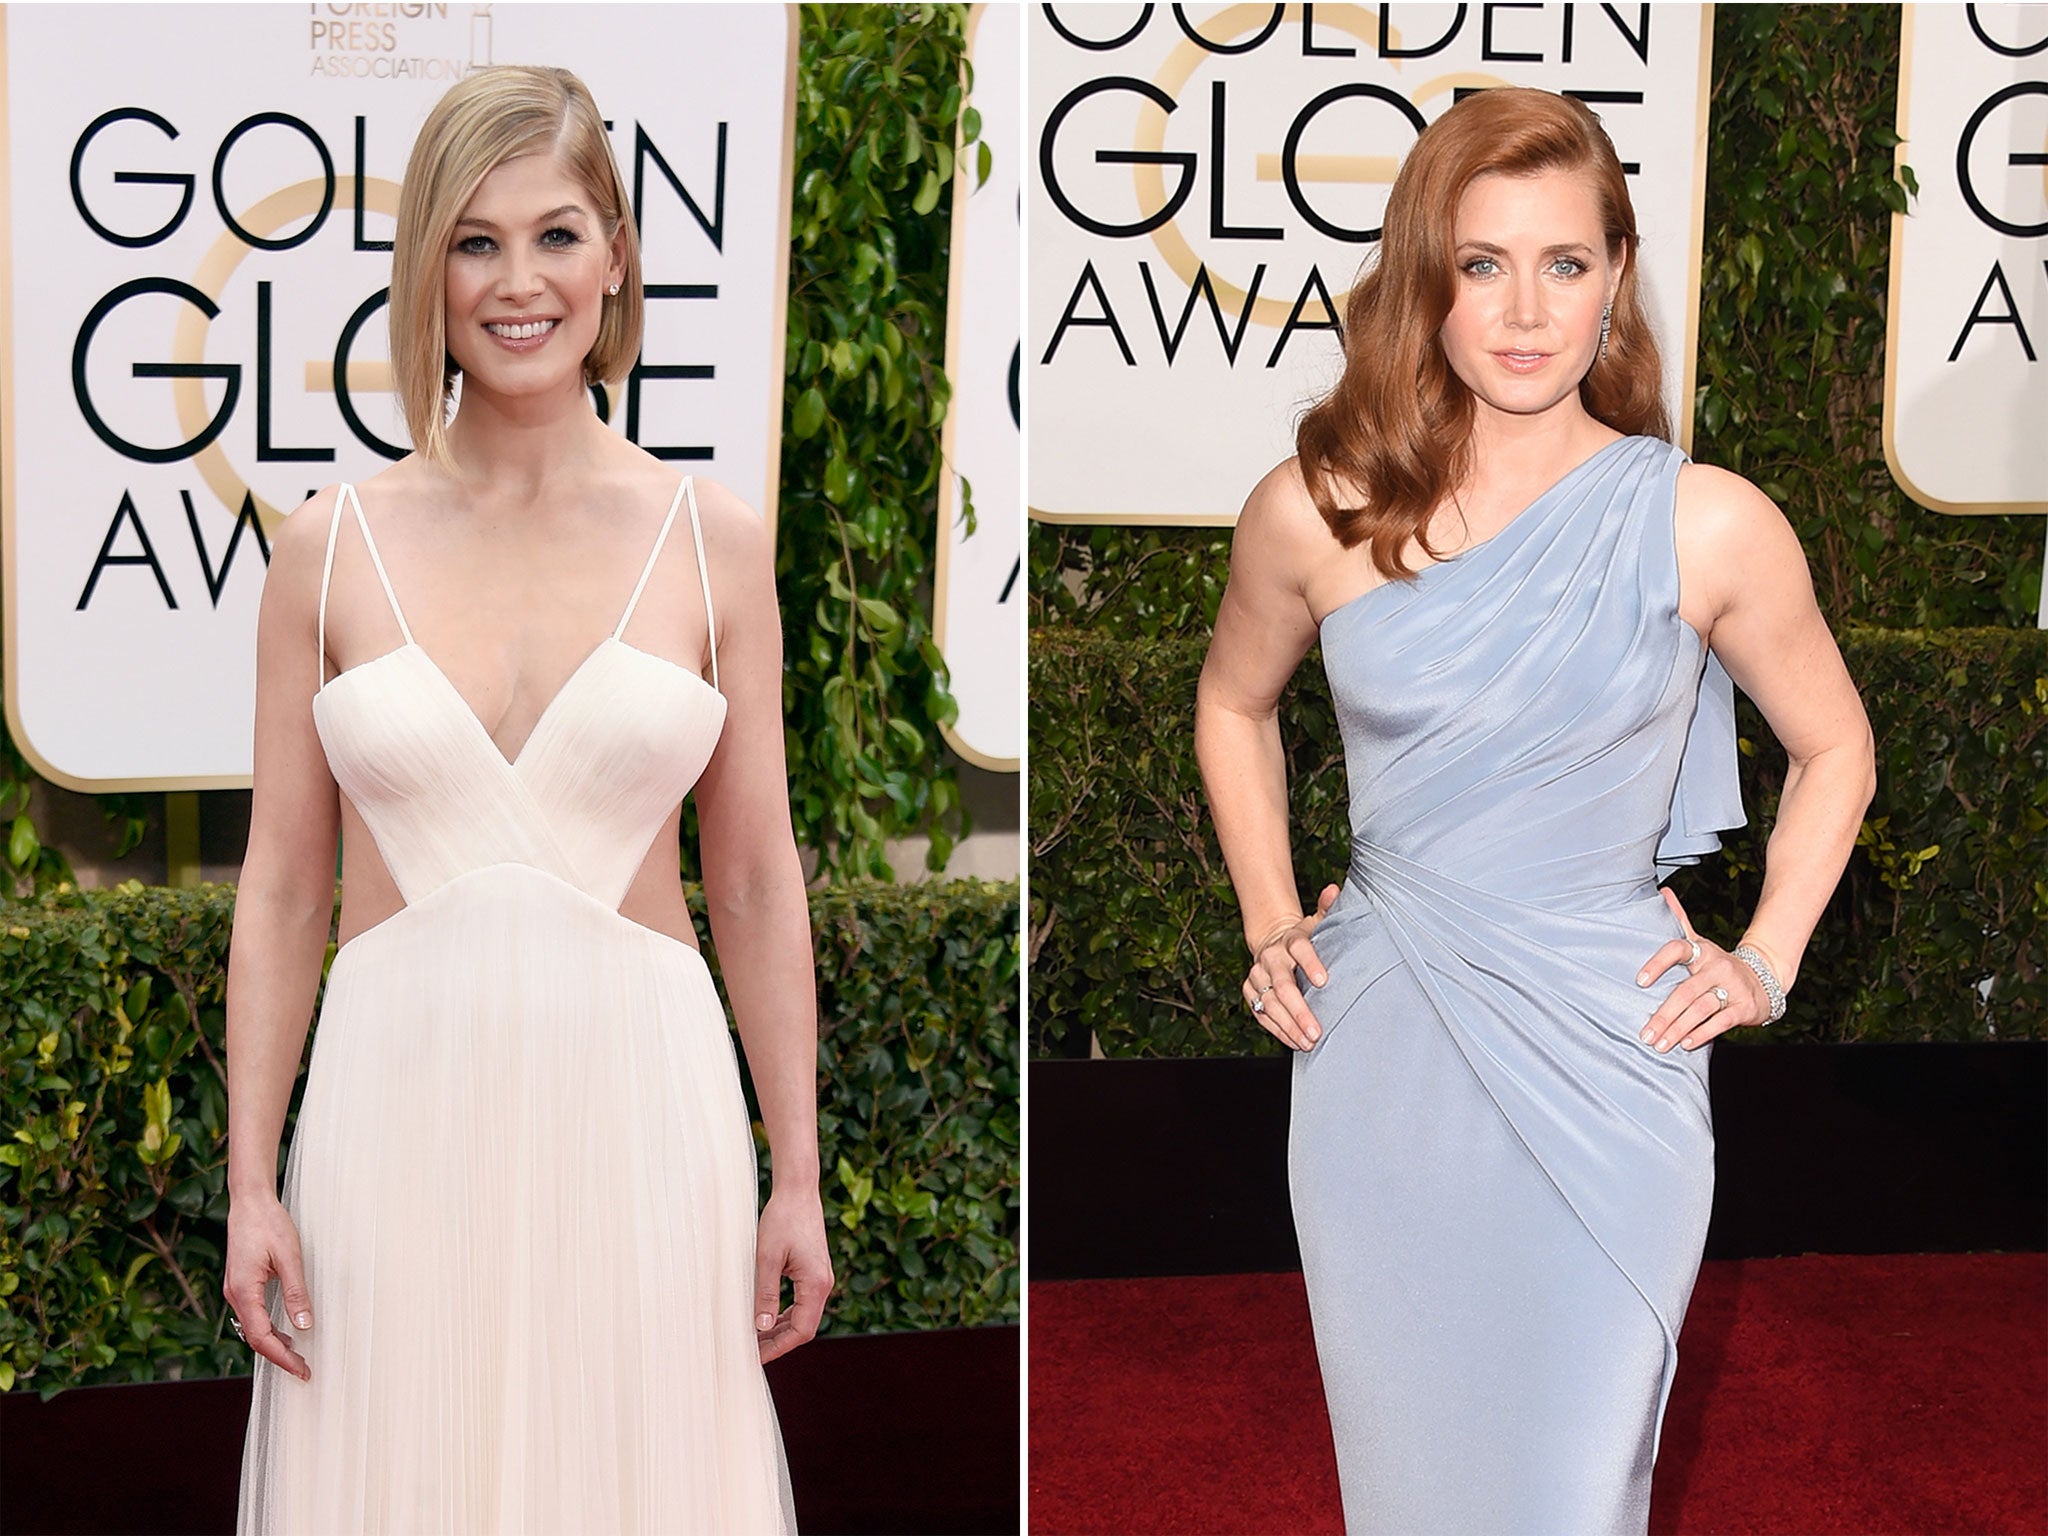 Golden Globes 2015 red carpet pictures: Best and worst dressed from  Rosamund Pike to Julianne Moore, The Independent